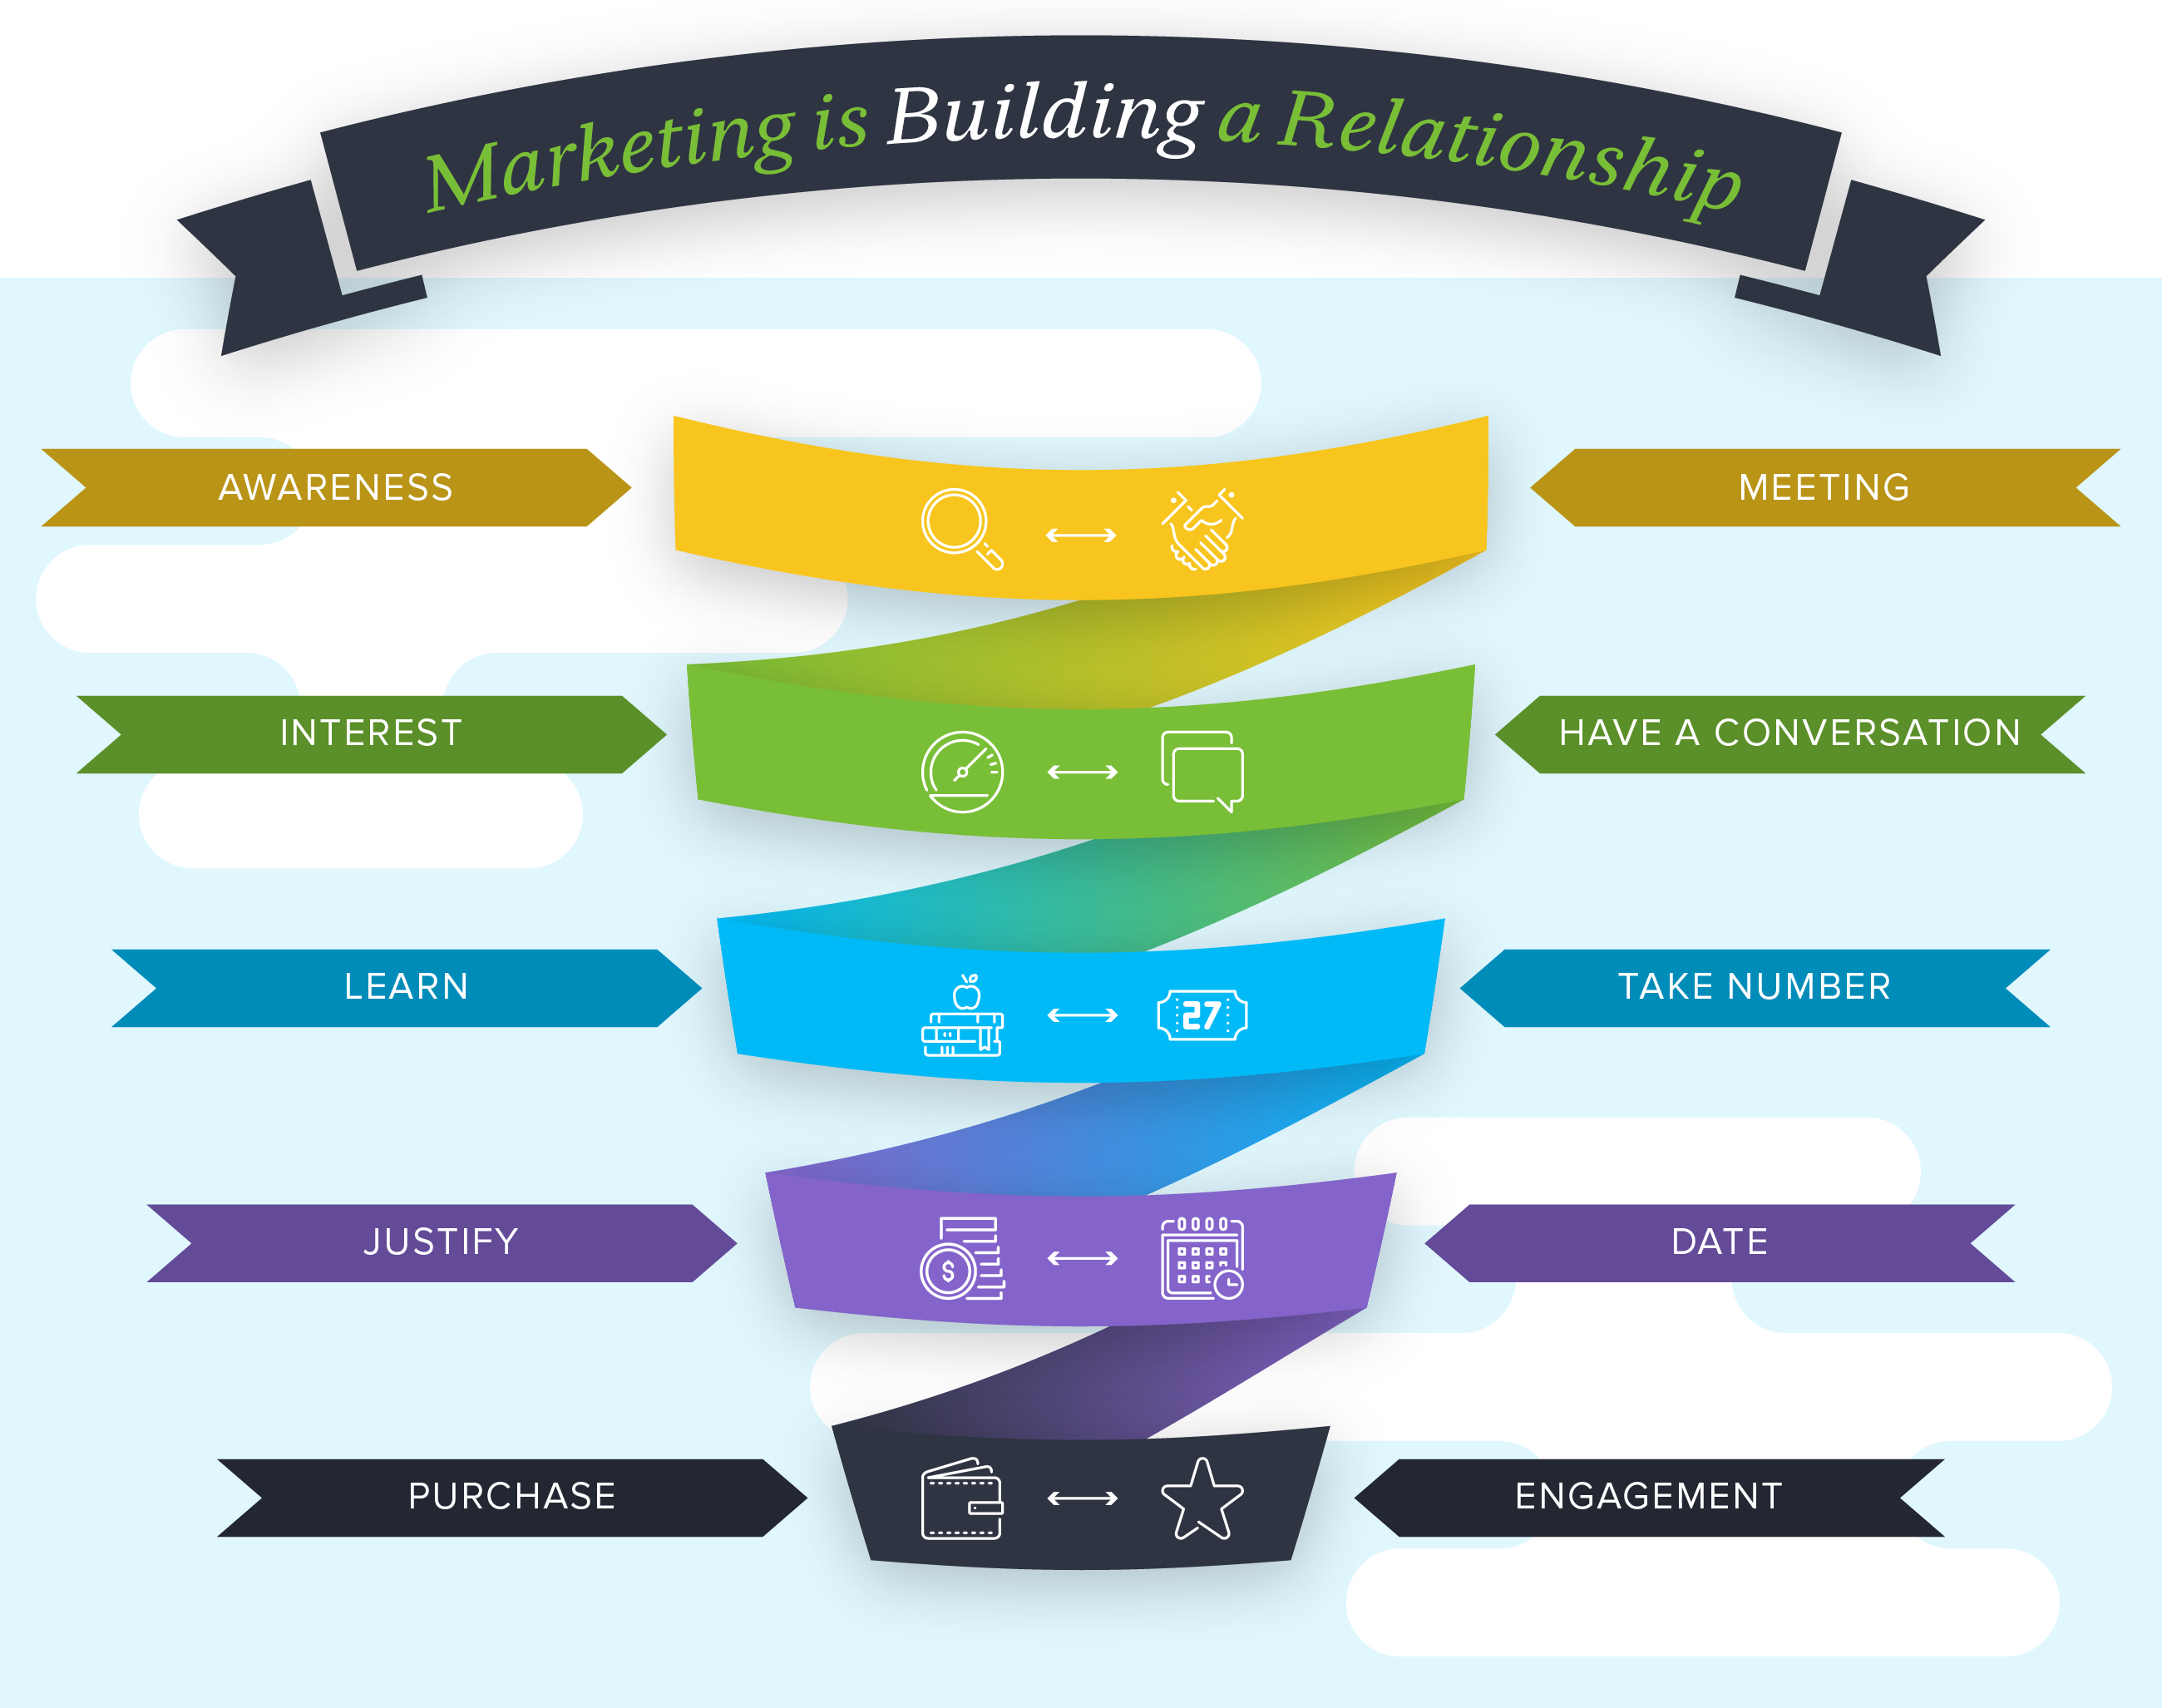 ms-3536-graphic-for-blog-post-marketing-is-building-a-relationship.png